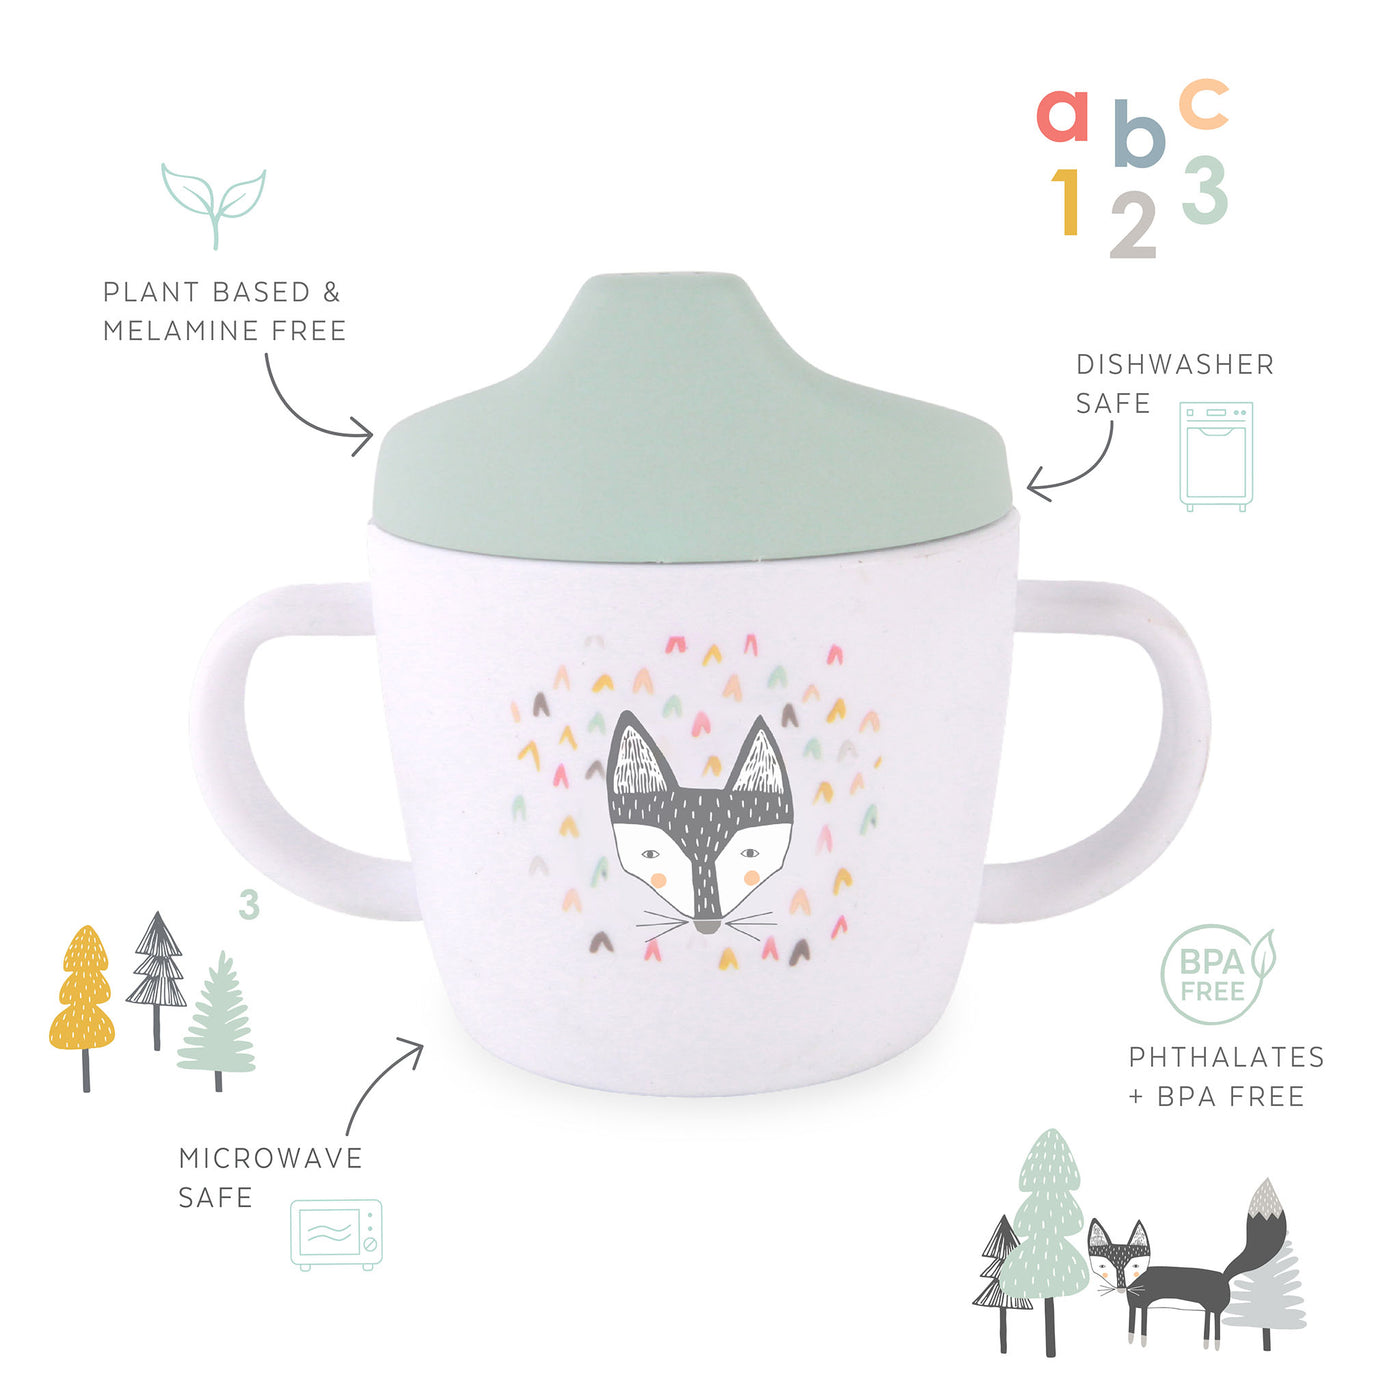 mae sip001 sippycup fox side features kids children